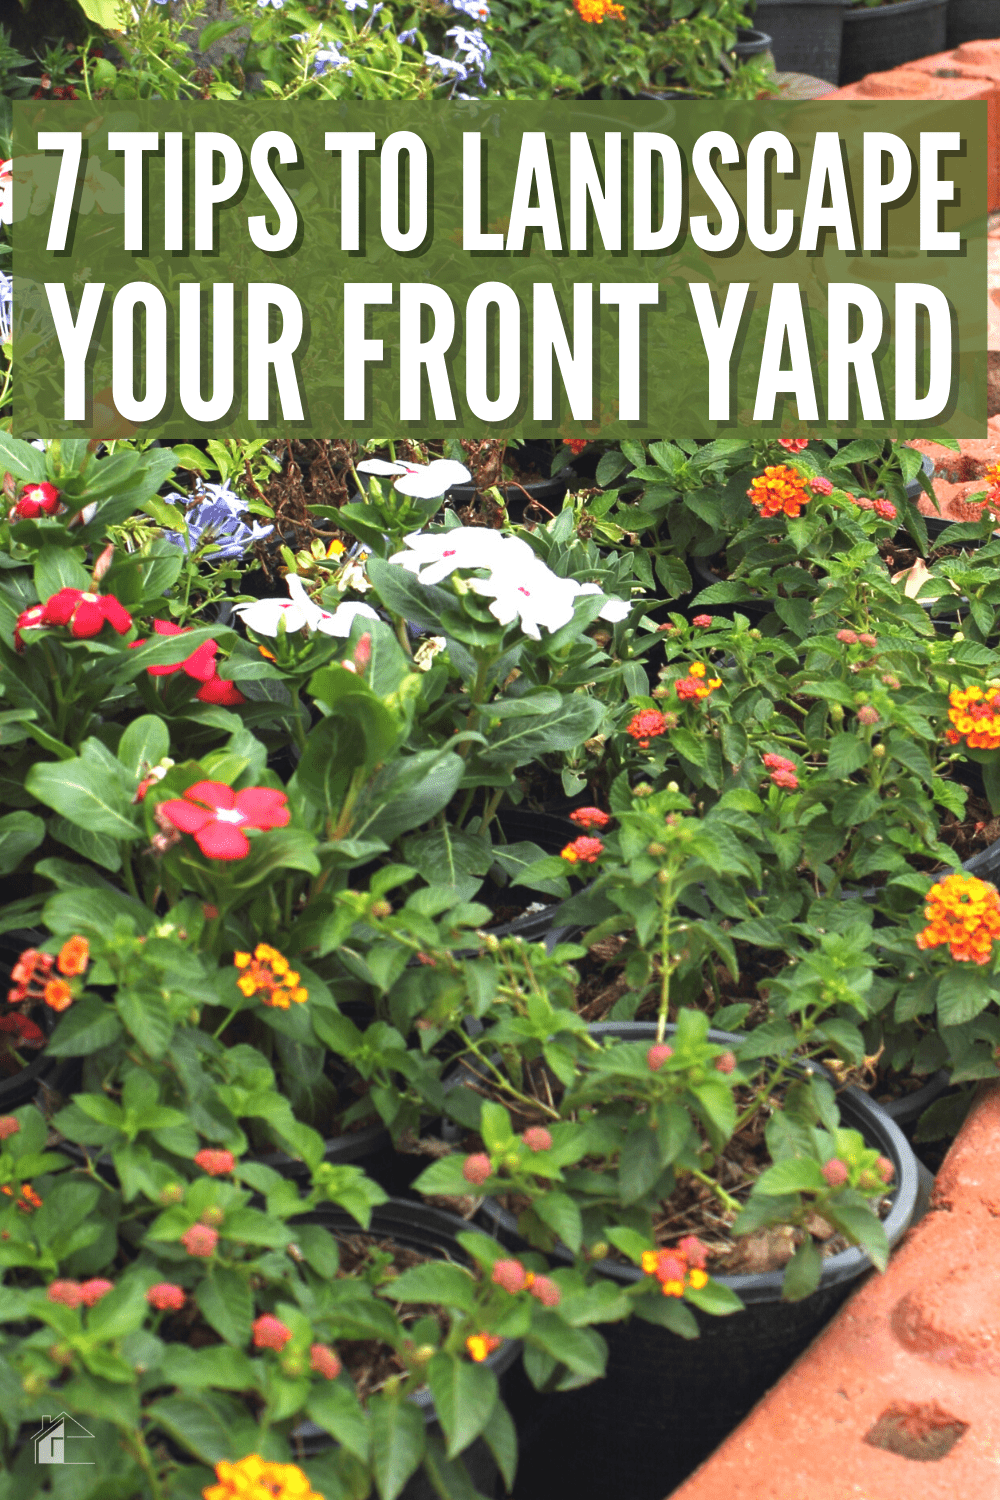 You are trying to find out how to landscape your front yard without breaking the bank. Here are 7 helpful tips to get your landscaping project started. #landscaping #Landscape #howto #frontyard via @mystayathome